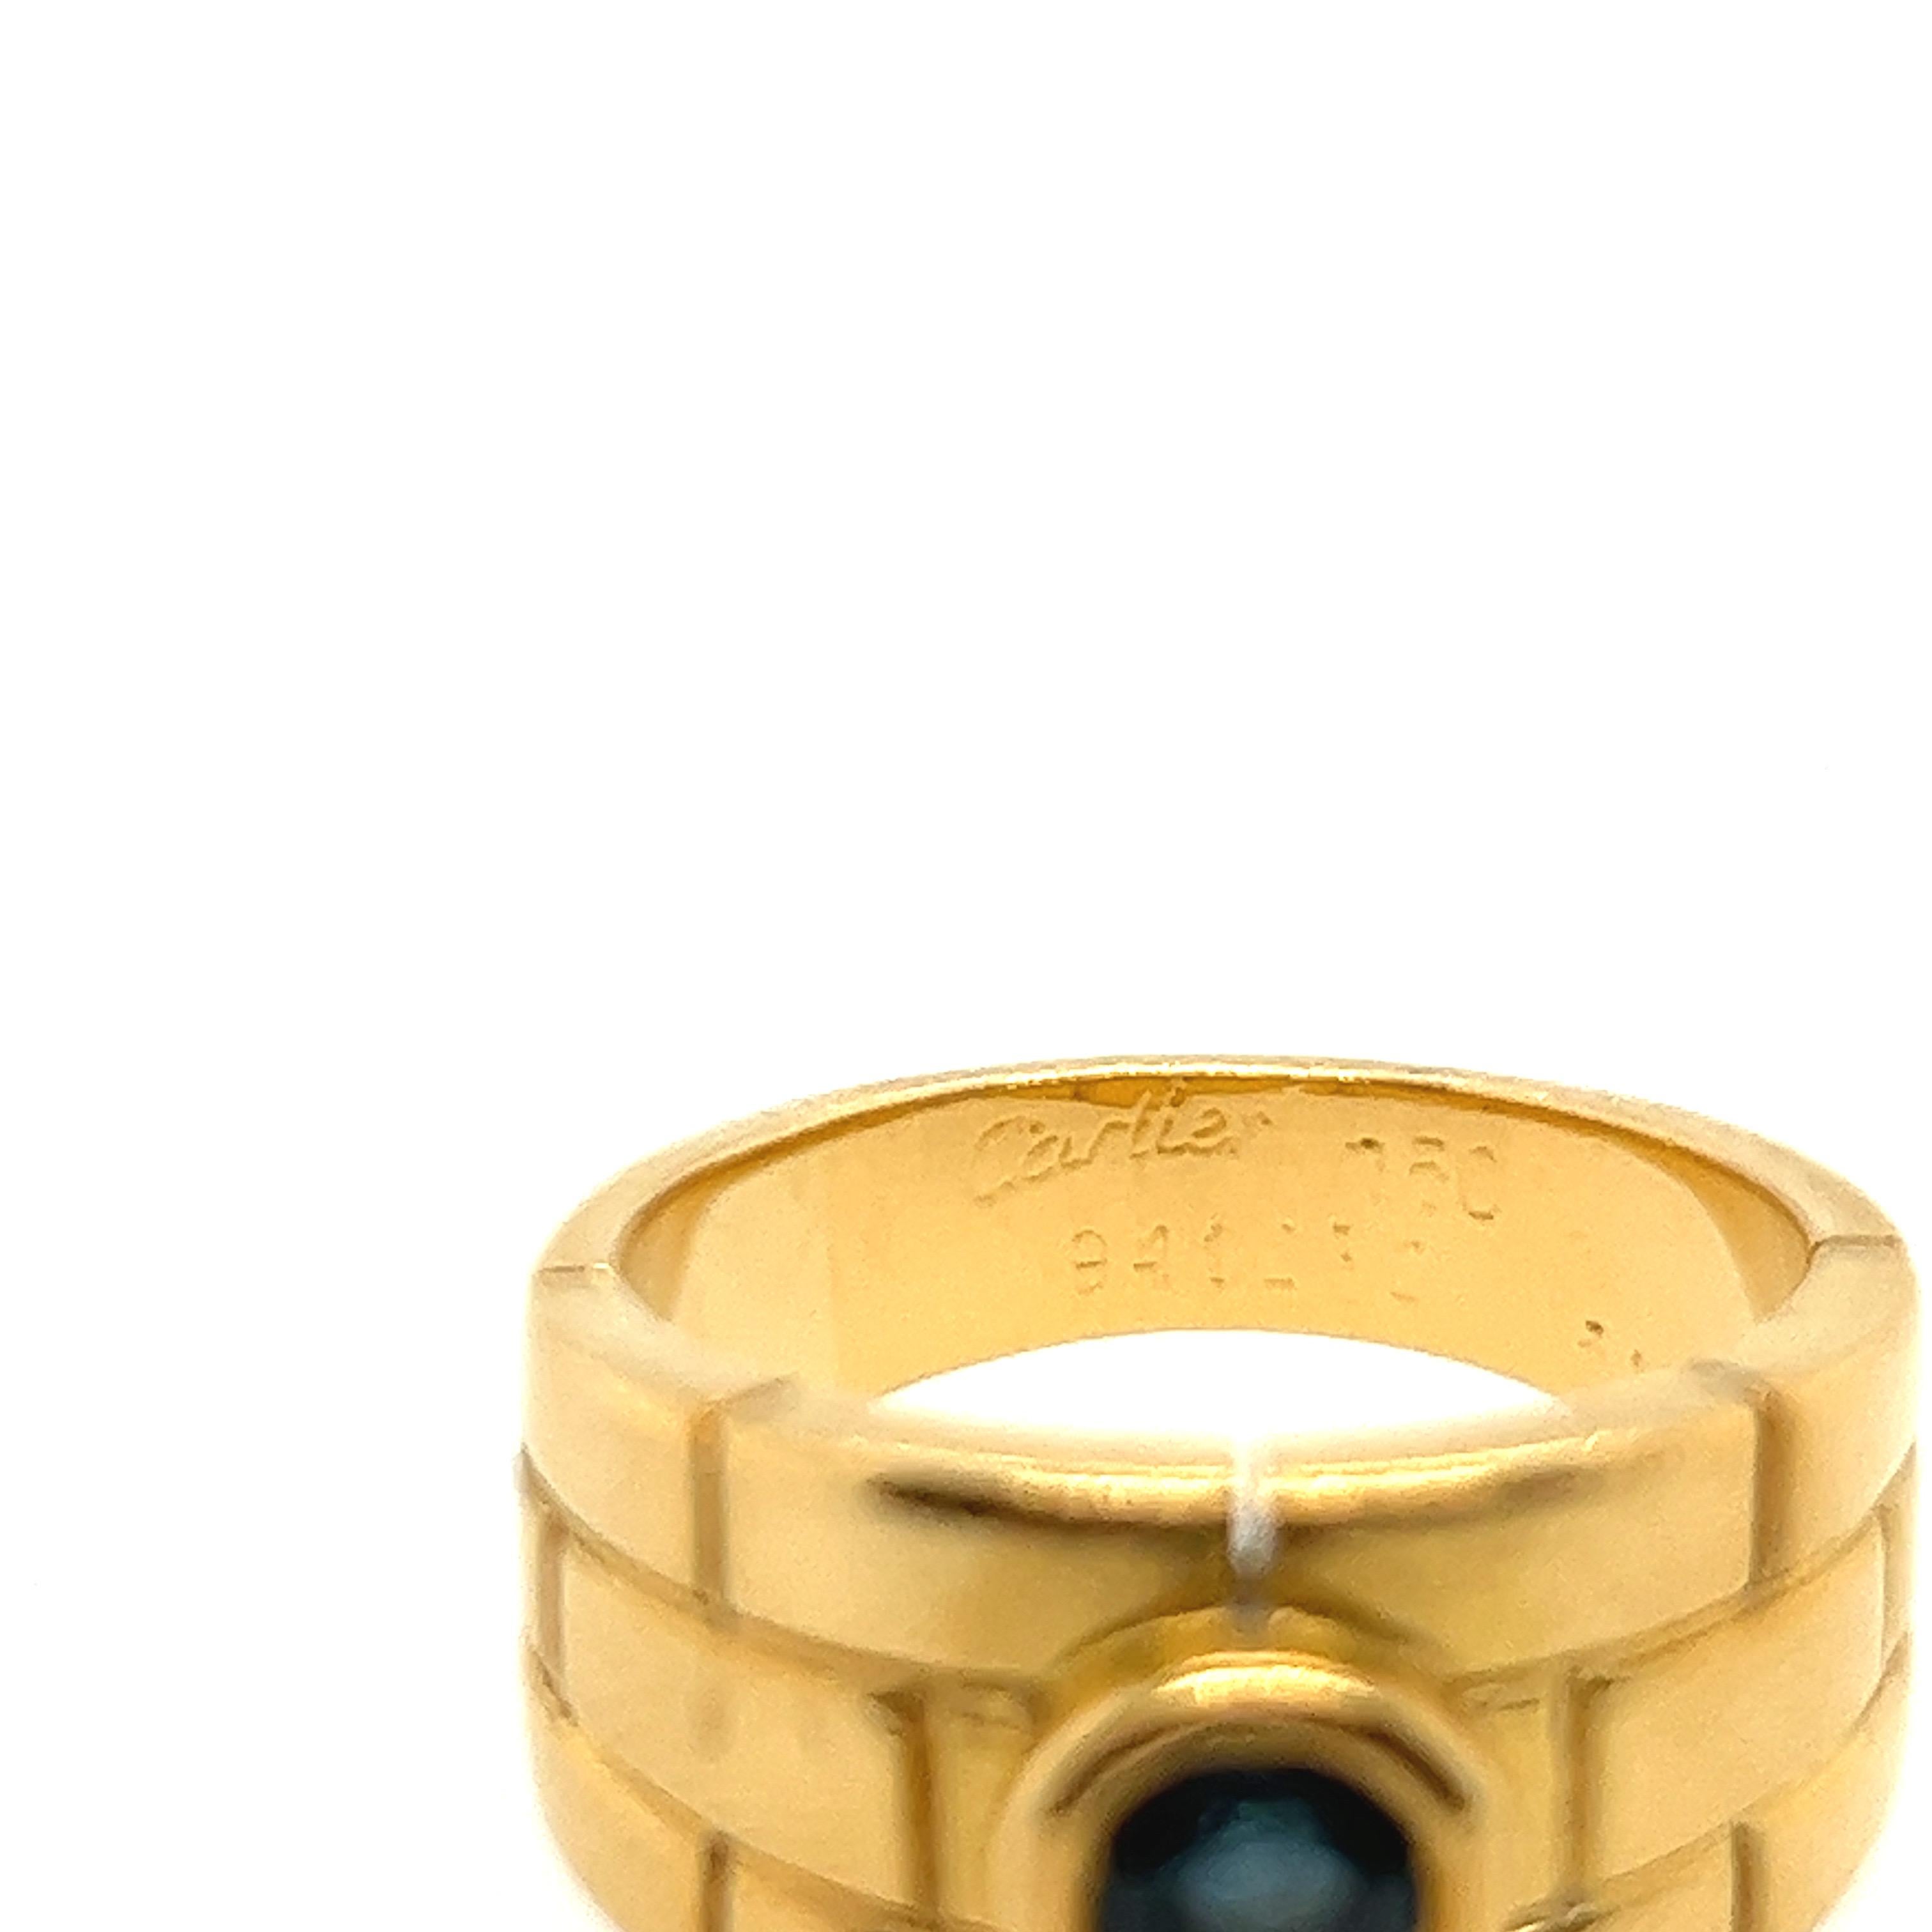 Cartier is known for their unique collections and classic pieces. From the panthers collection comes this carved brick pattern 18 k yellow gold band. Nestled in the centre is a beautiful blue sapphire. Ref # B4001400
Comes in original box.